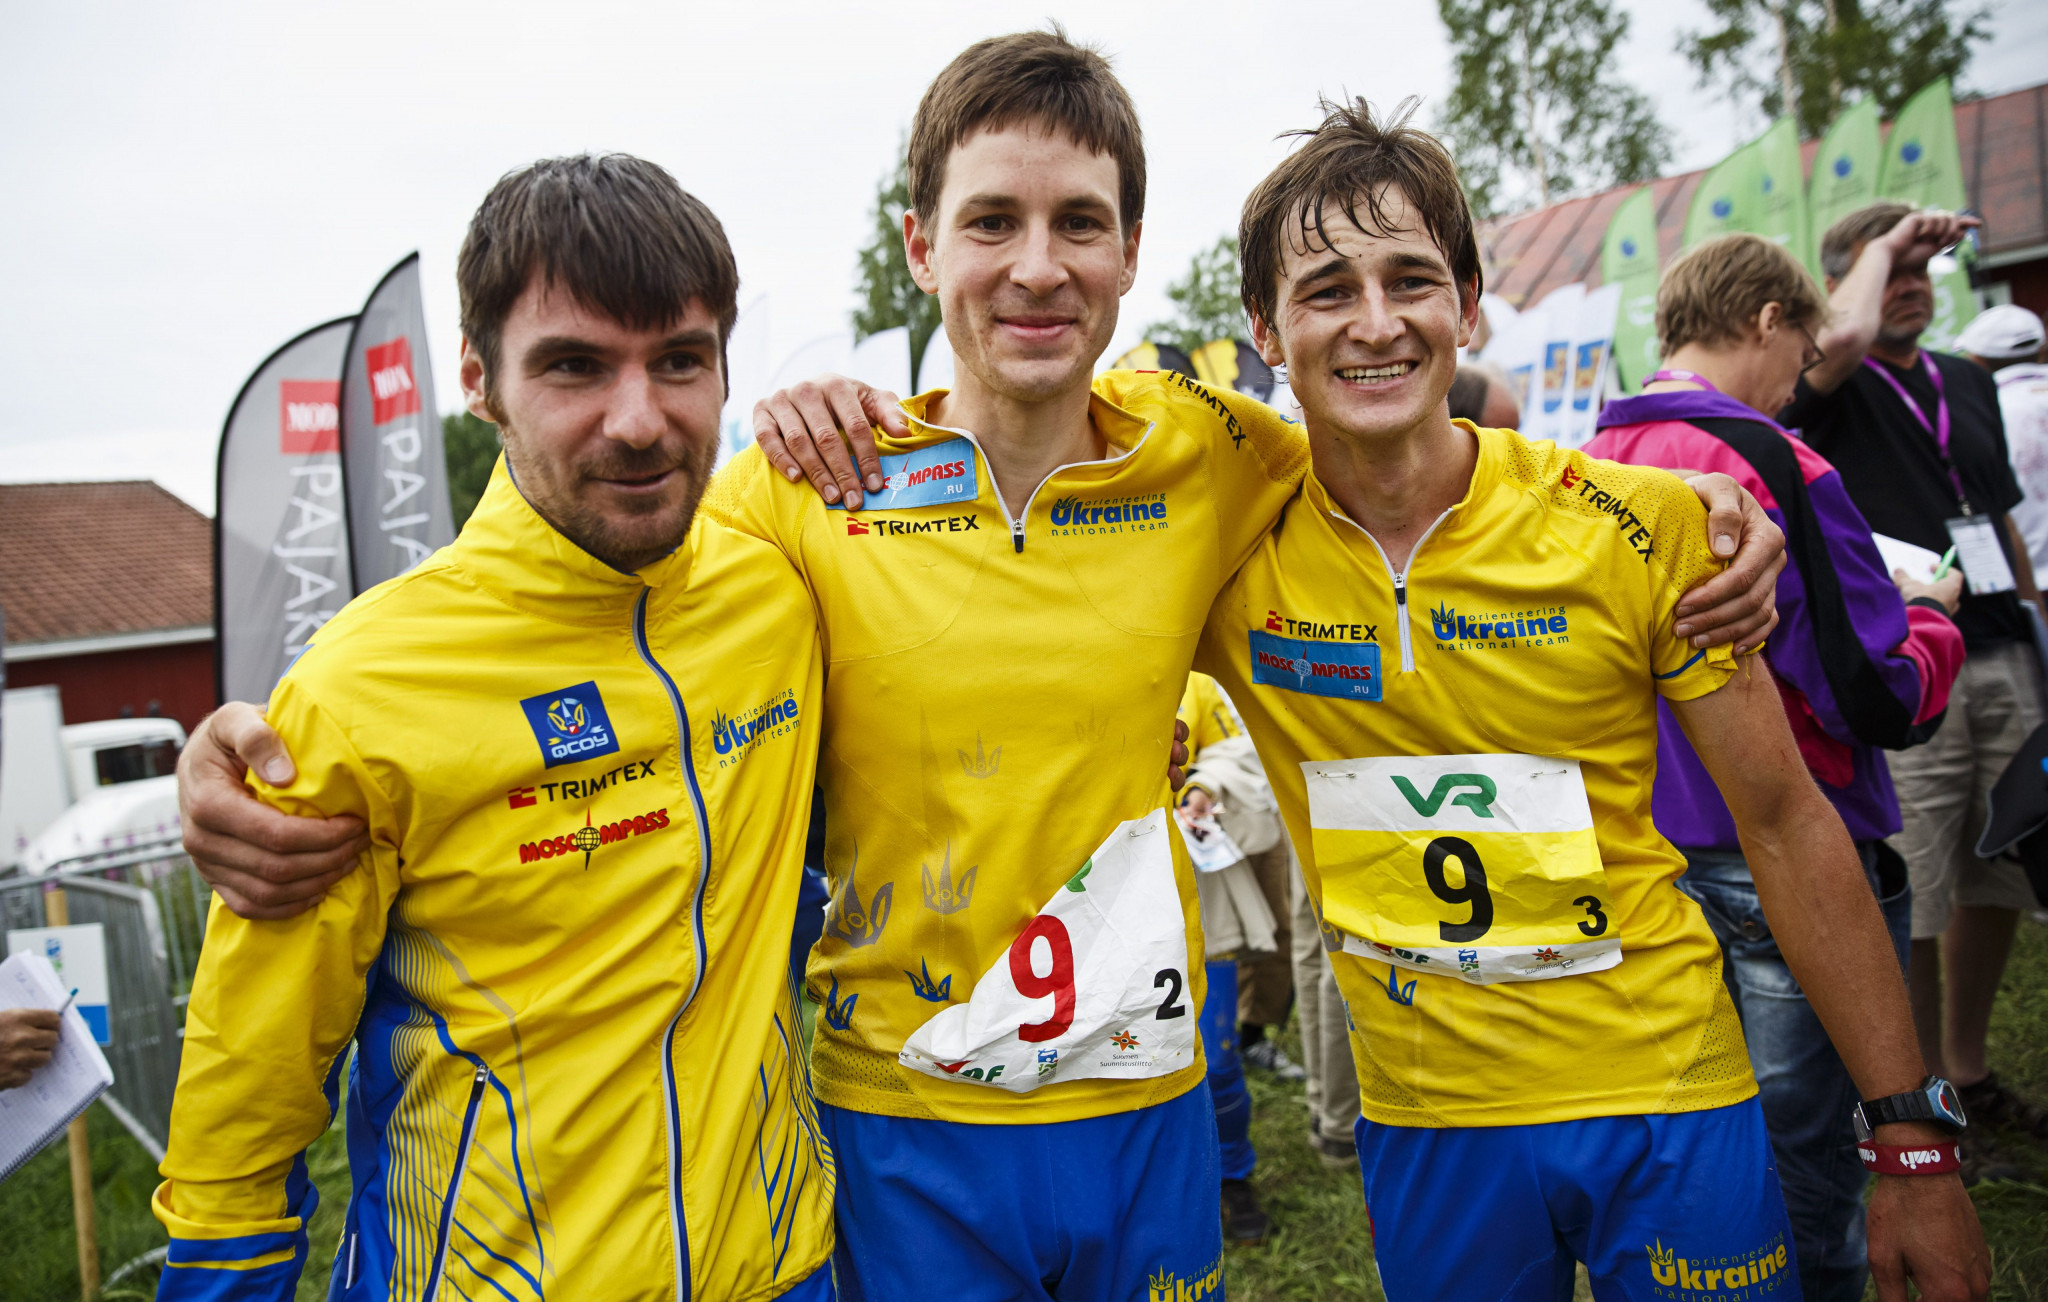 Orienteering calls for donations to allow Ukrainians to compete